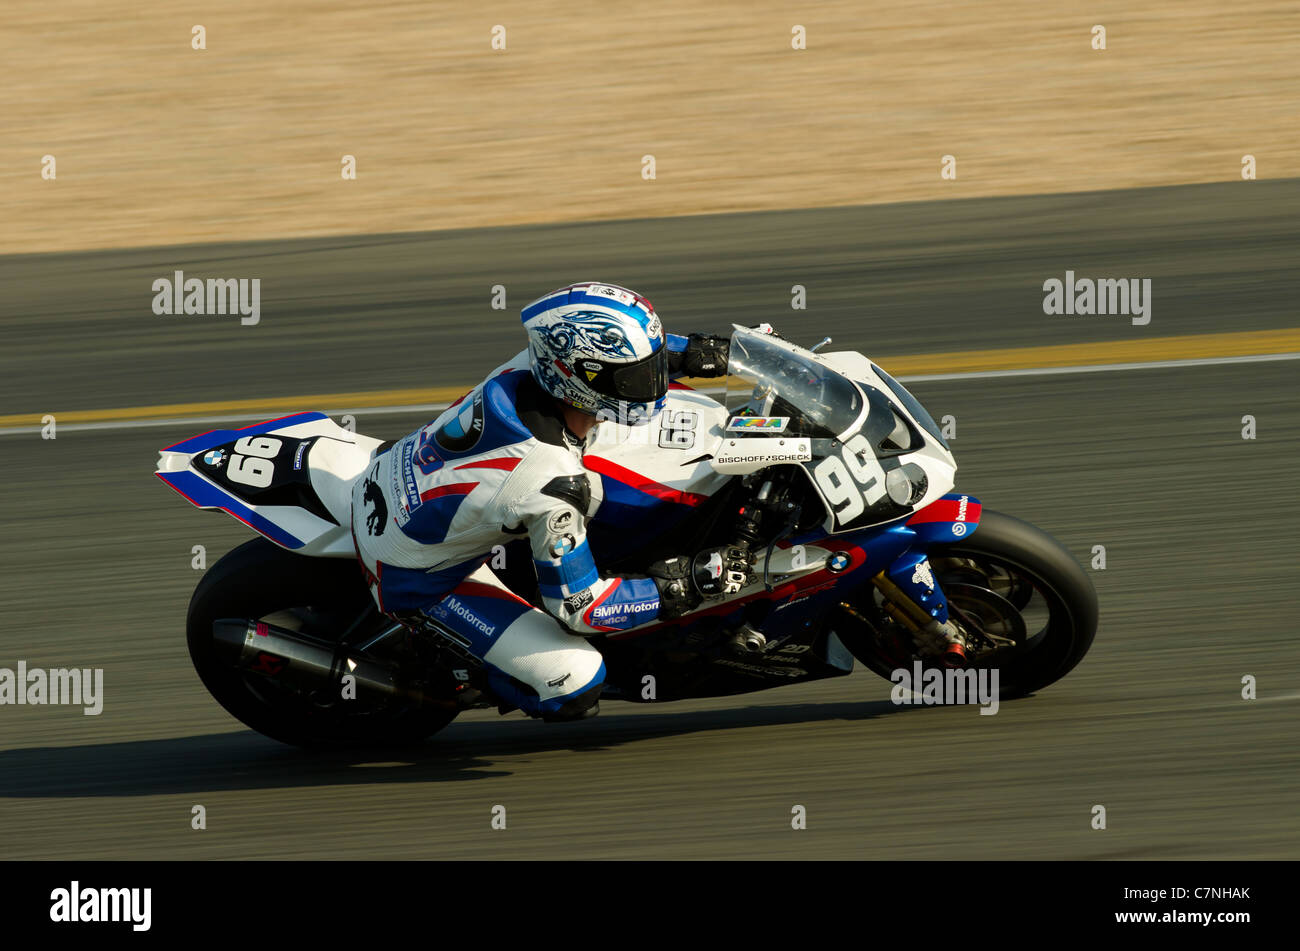 Sebastien GIMBERT riding his BMW MOTORRAD France 99 during the 2011 24 hours of Le Mans Stock Photo